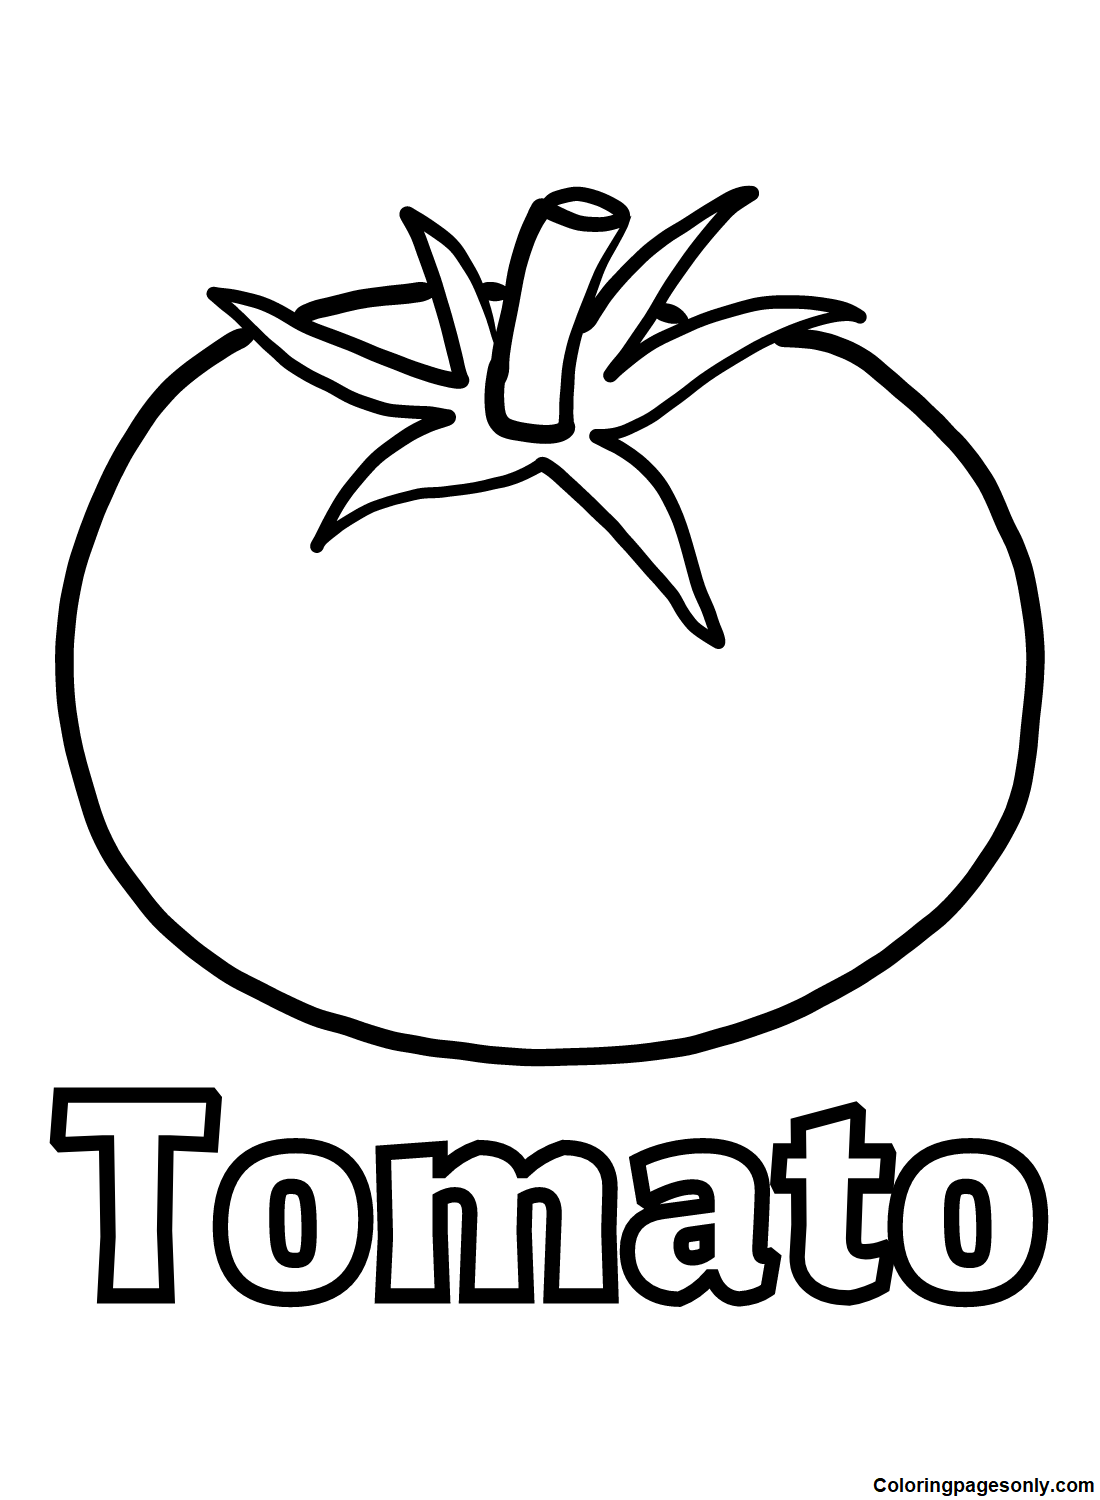 Free Tomato Images Coloring Pages